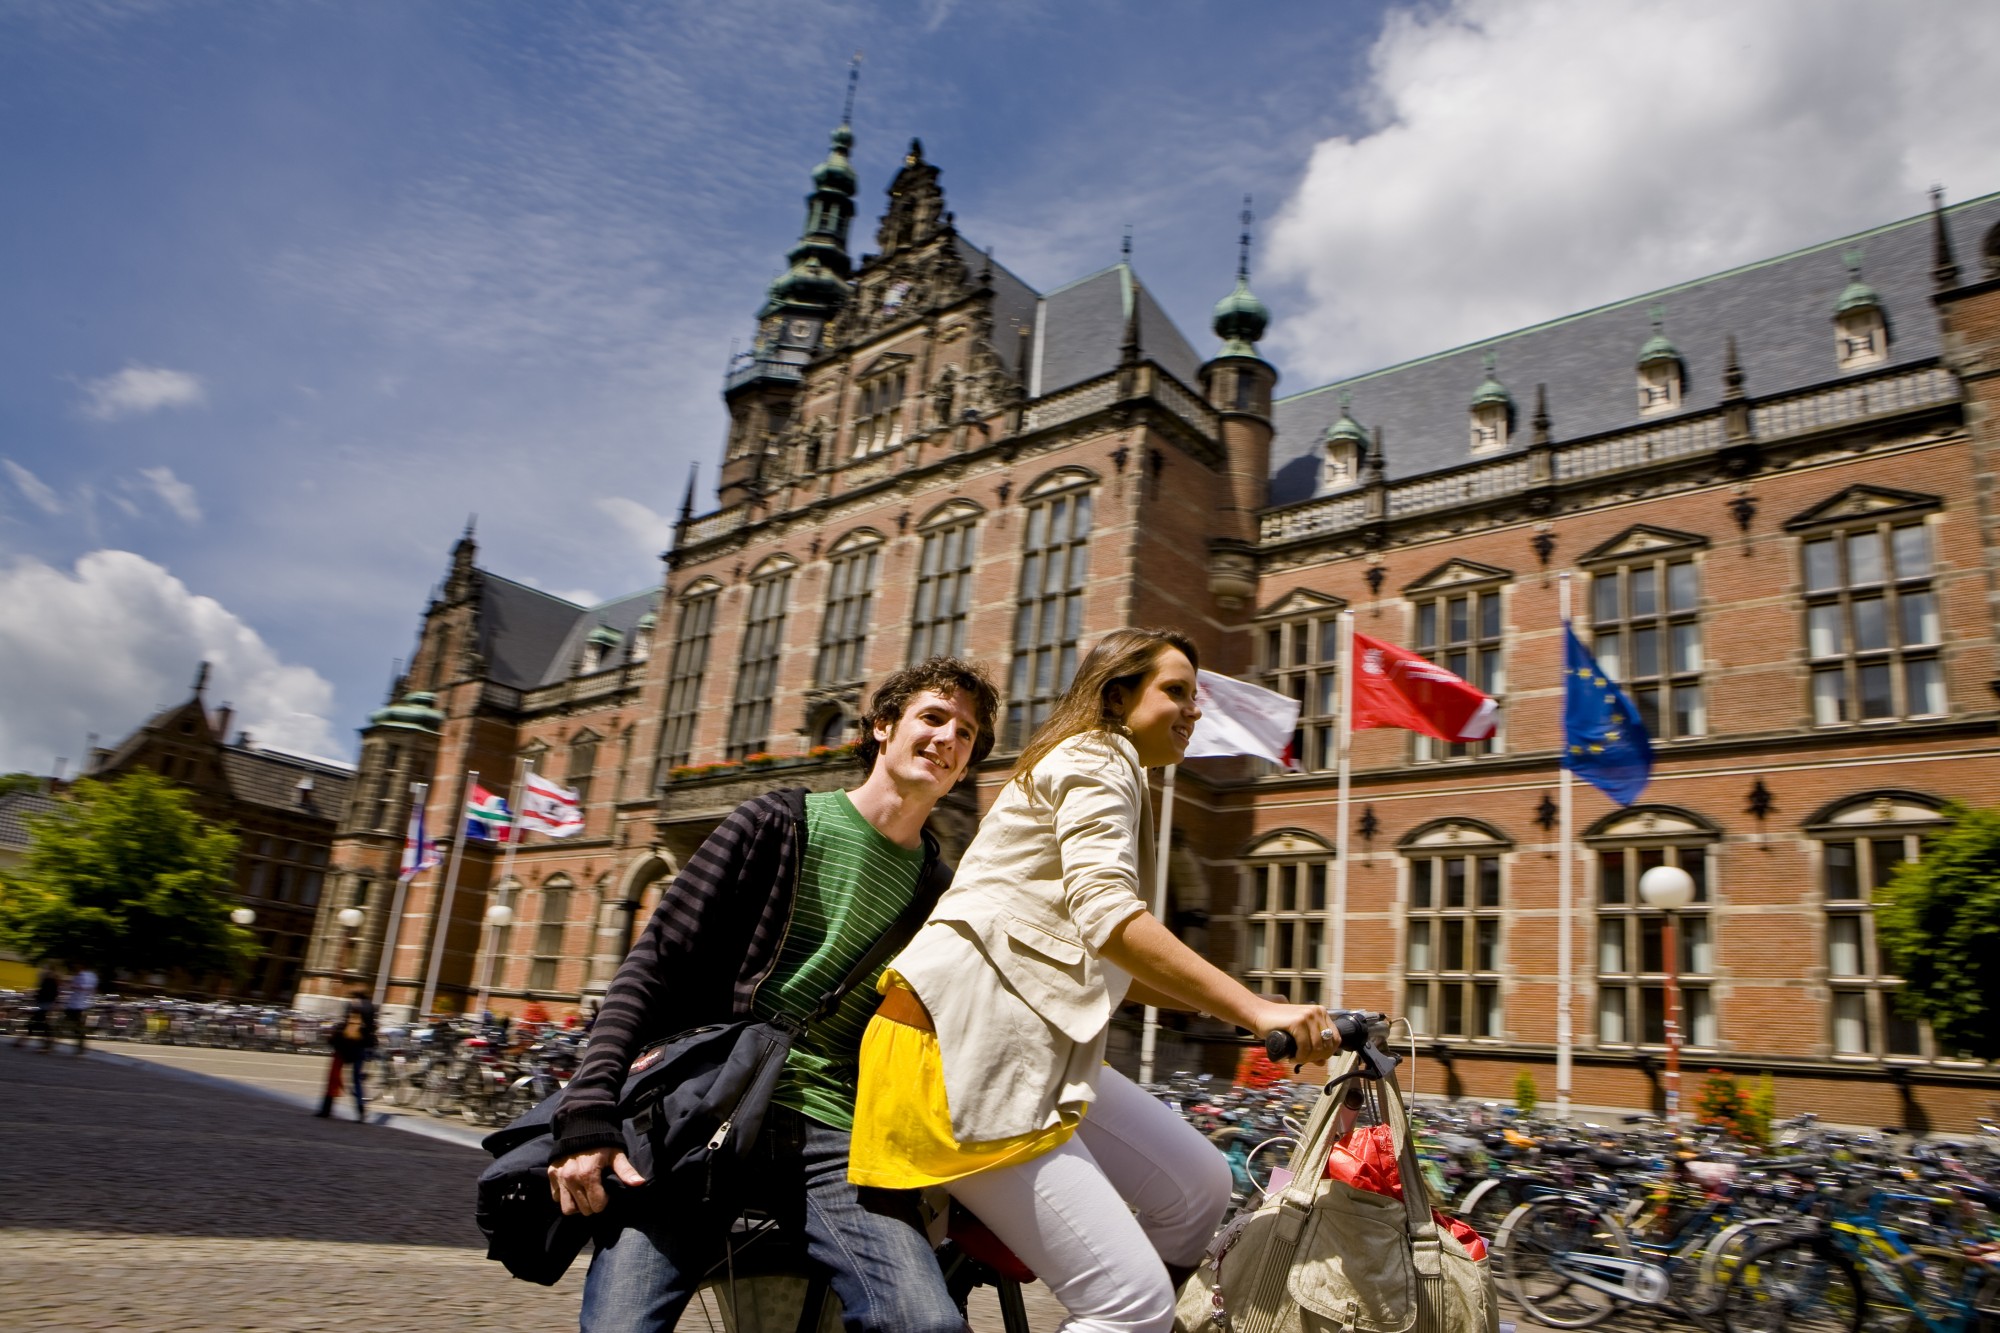 Open day at the university of Groningen